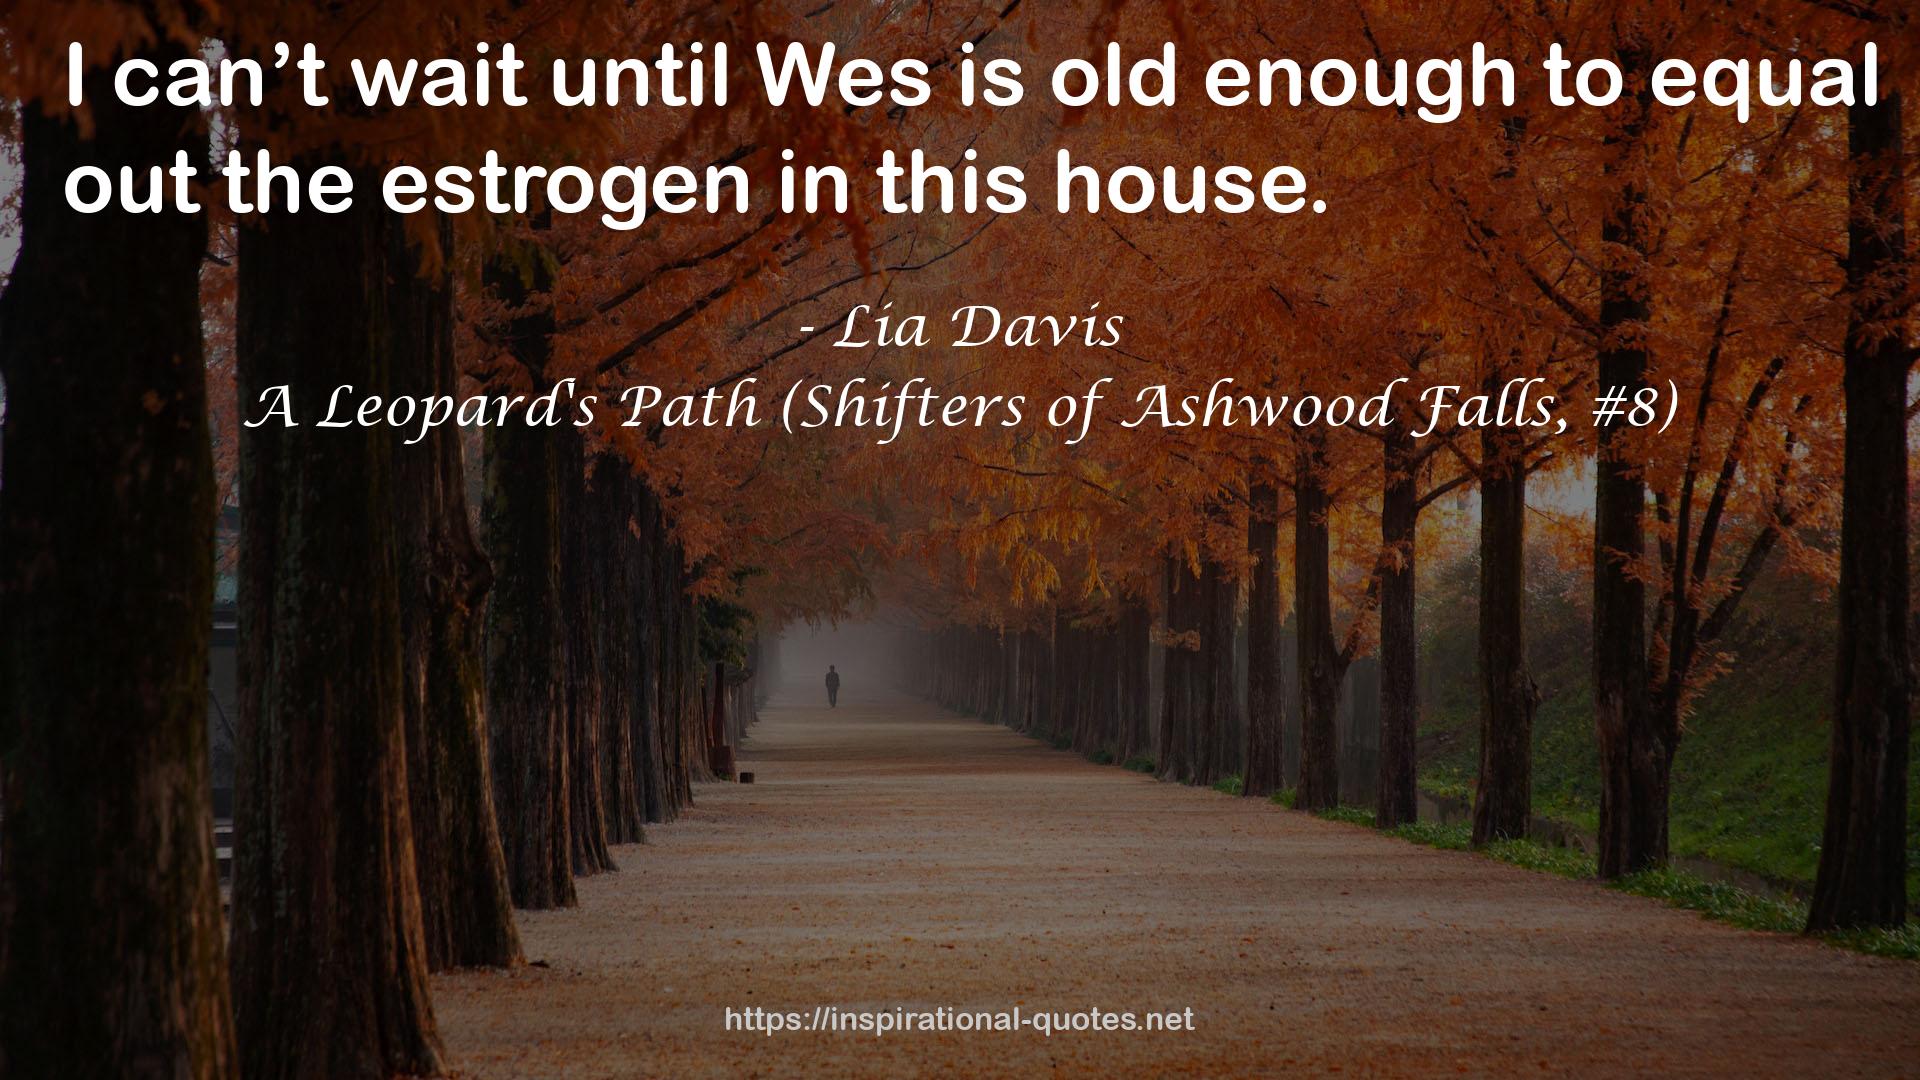 A Leopard's Path (Shifters of Ashwood Falls, #8) QUOTES